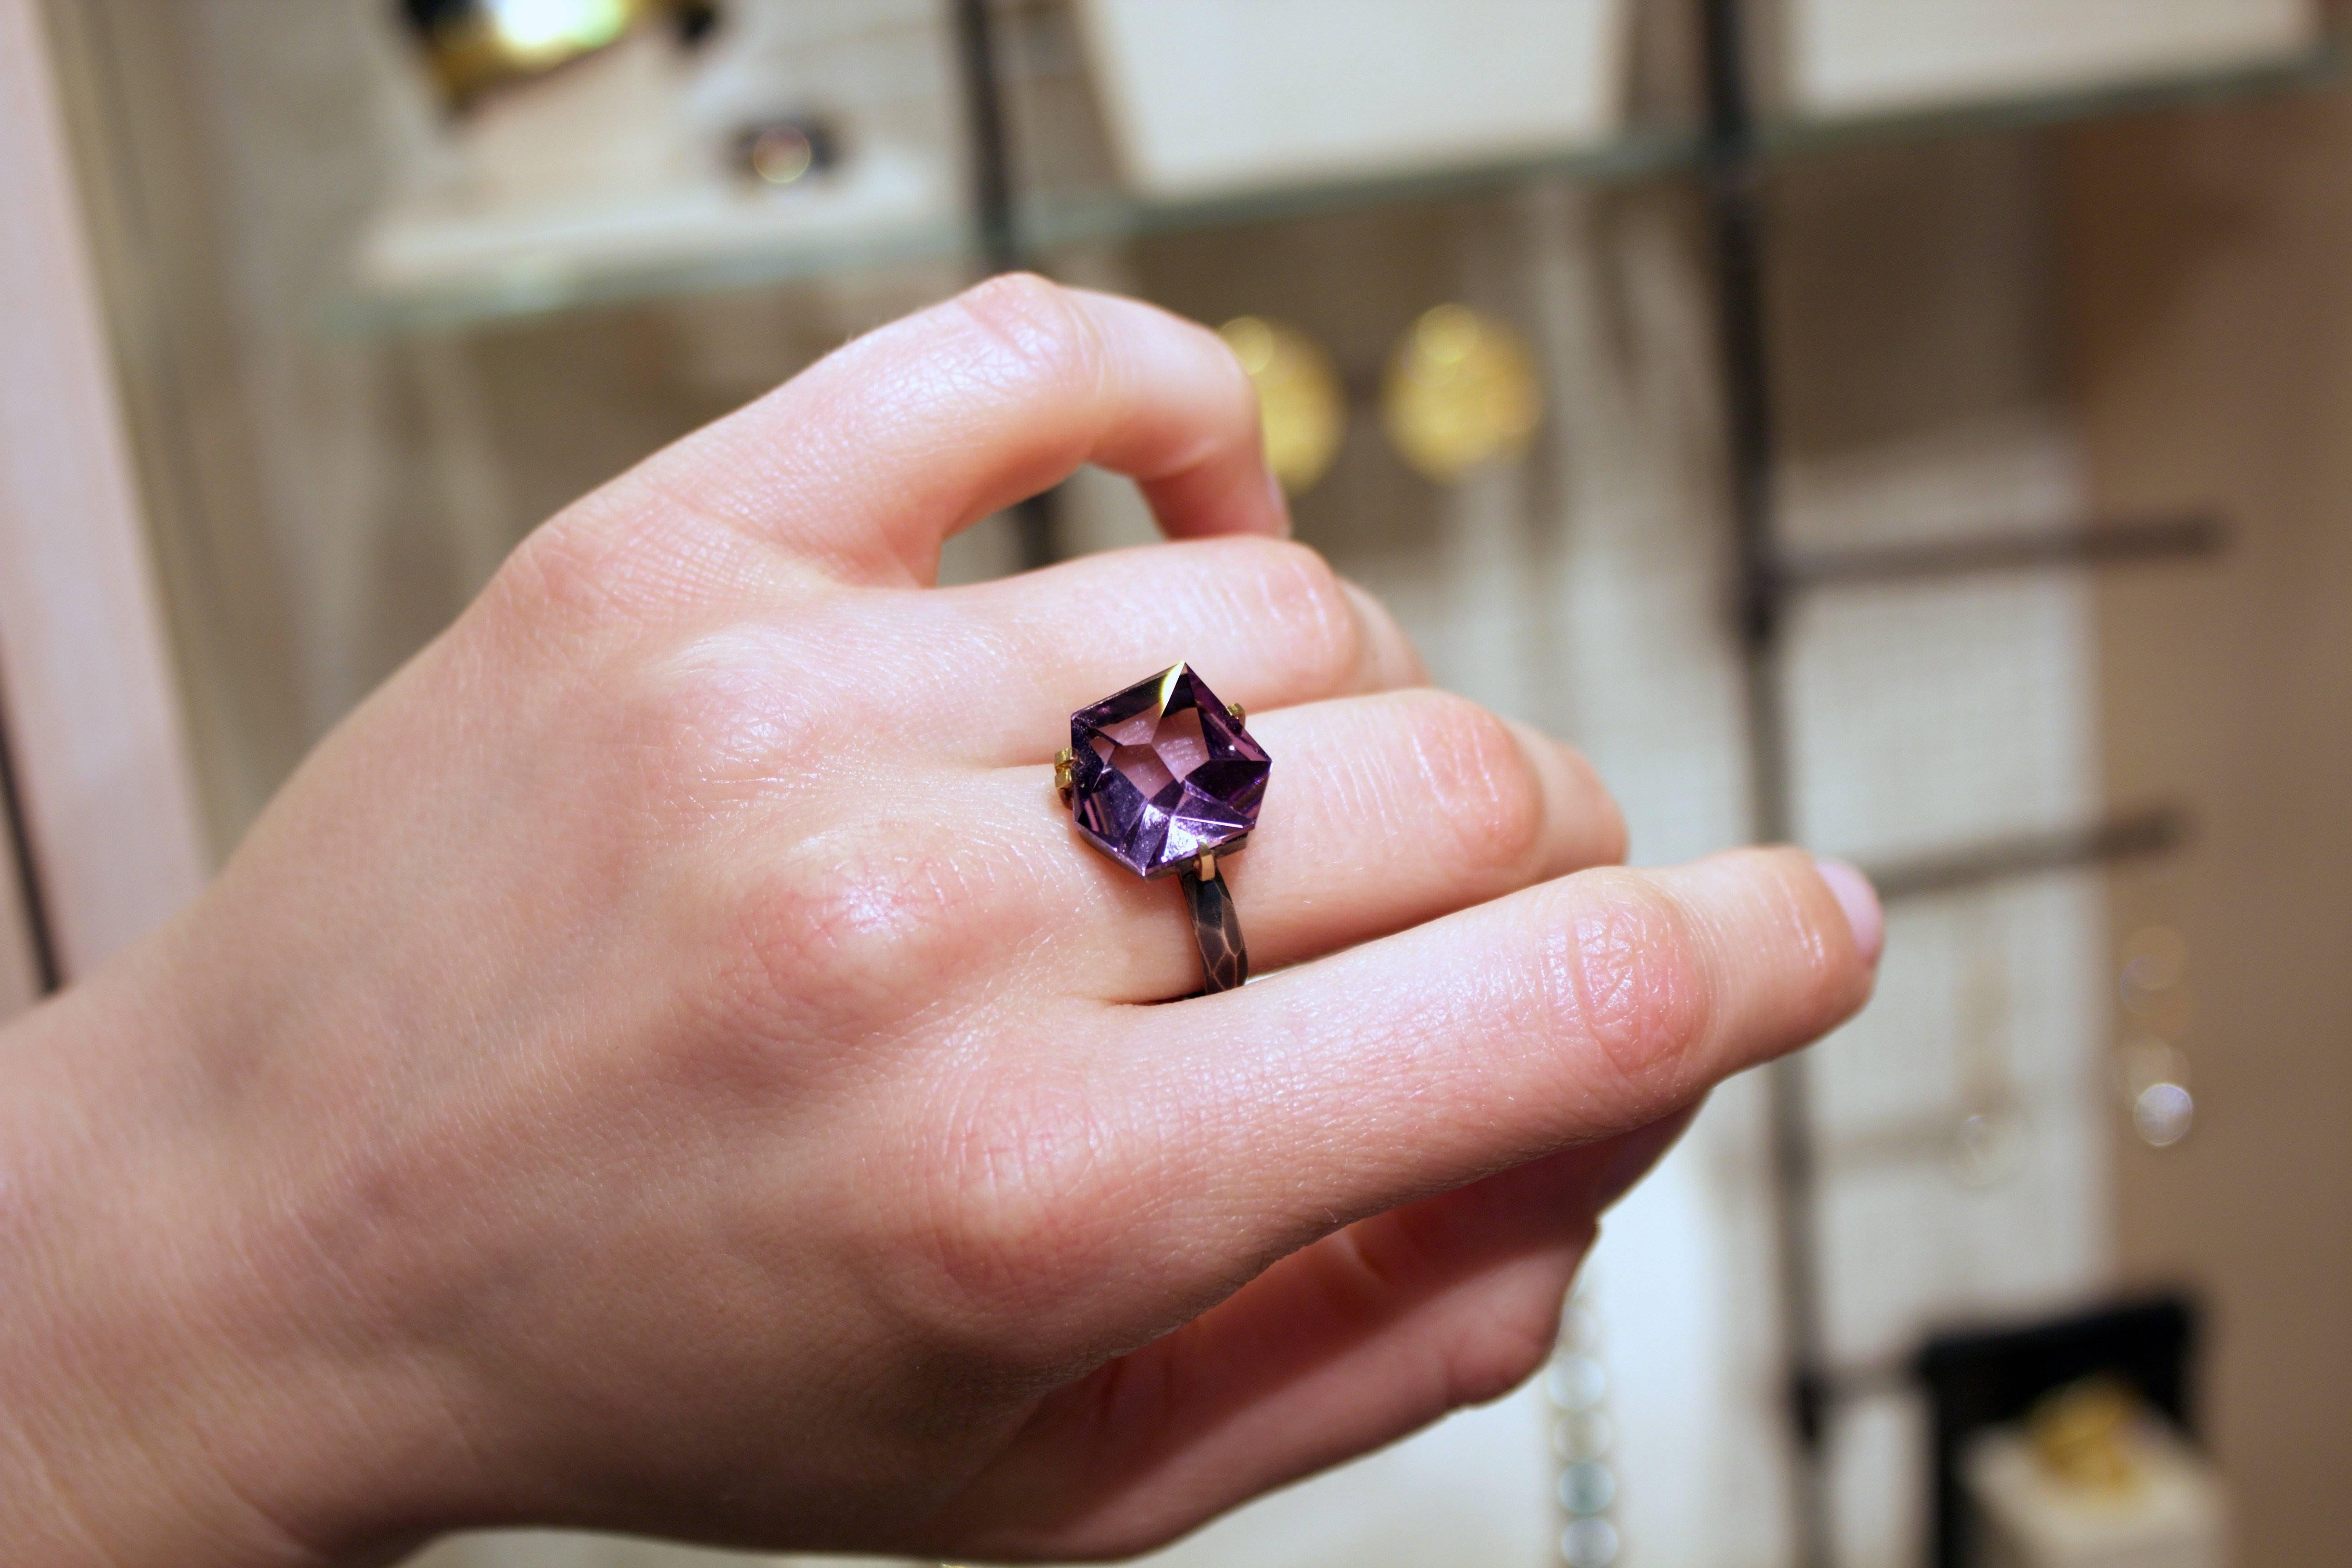 Facets Ring handcrafted by acclaimed jewelry artist Elizabeth Garvin showcasing a spectacular 8.50 carat amethyst custom-cut in Brazilian and set in matte-finished 18k yellow gold single and double bar prongs attached to a hammered oxidized sterling